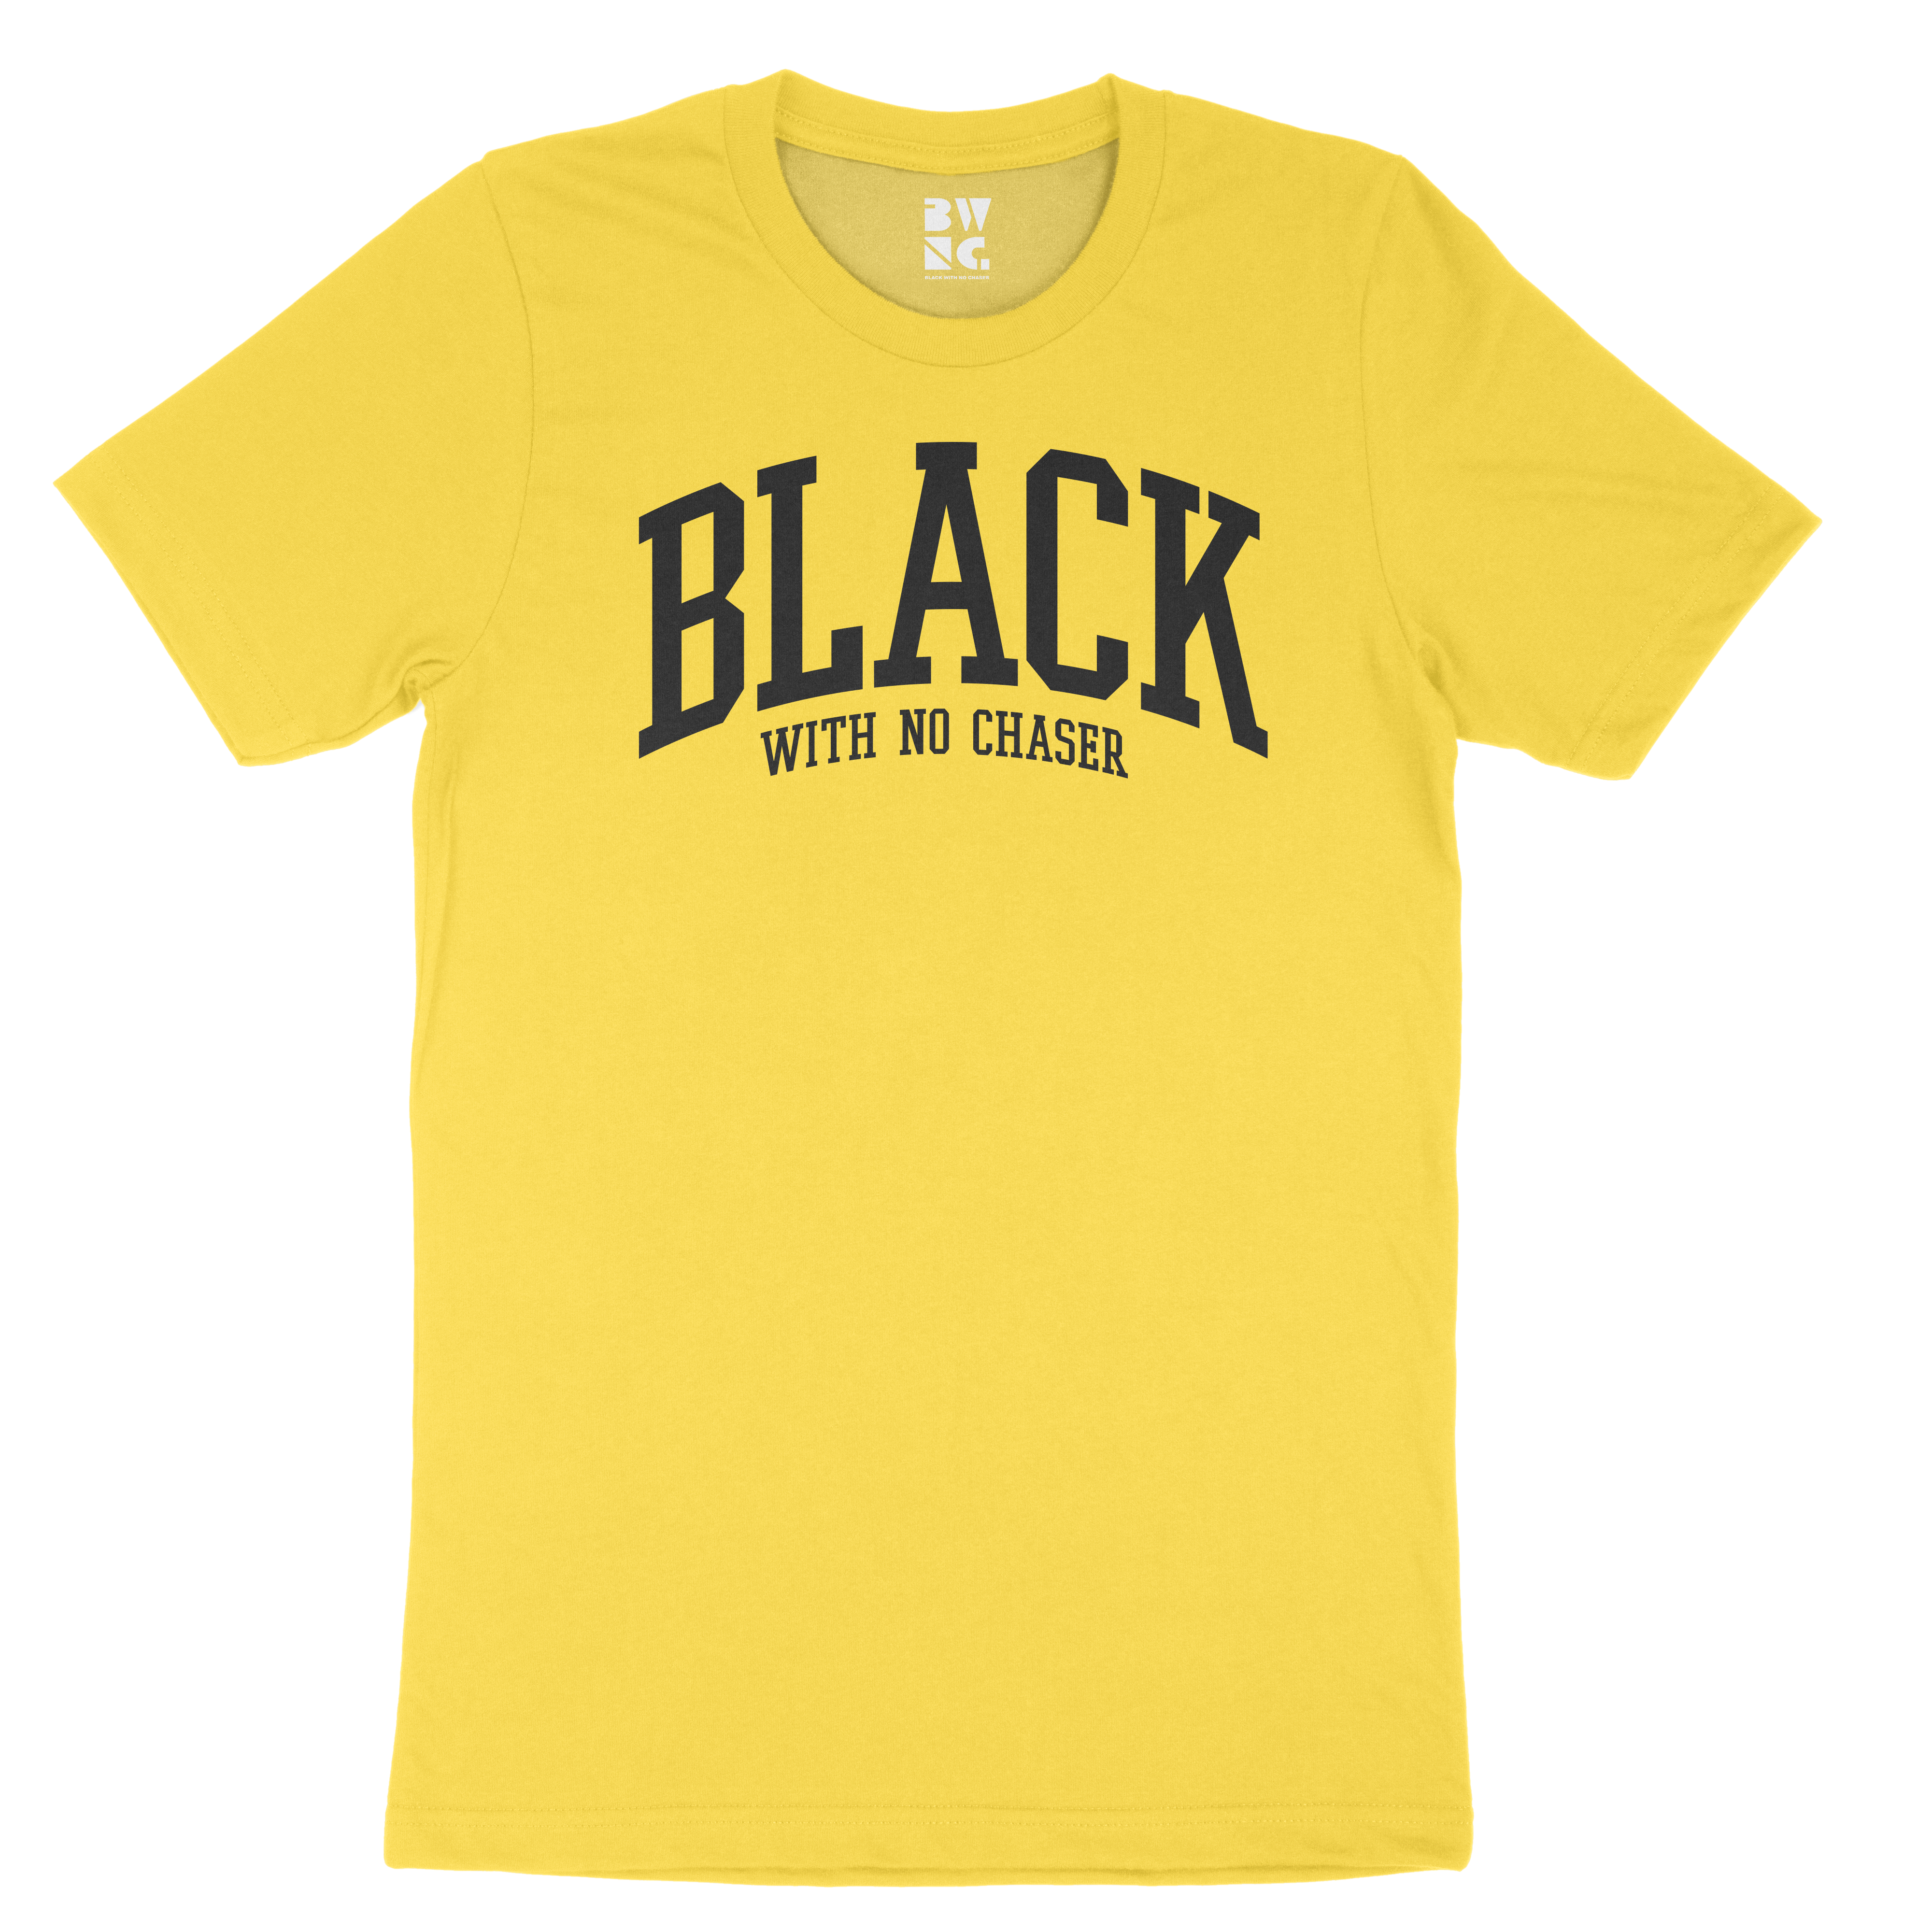 "Black With No Chaser" Collegiate Unisex T-shirt (Yellow)